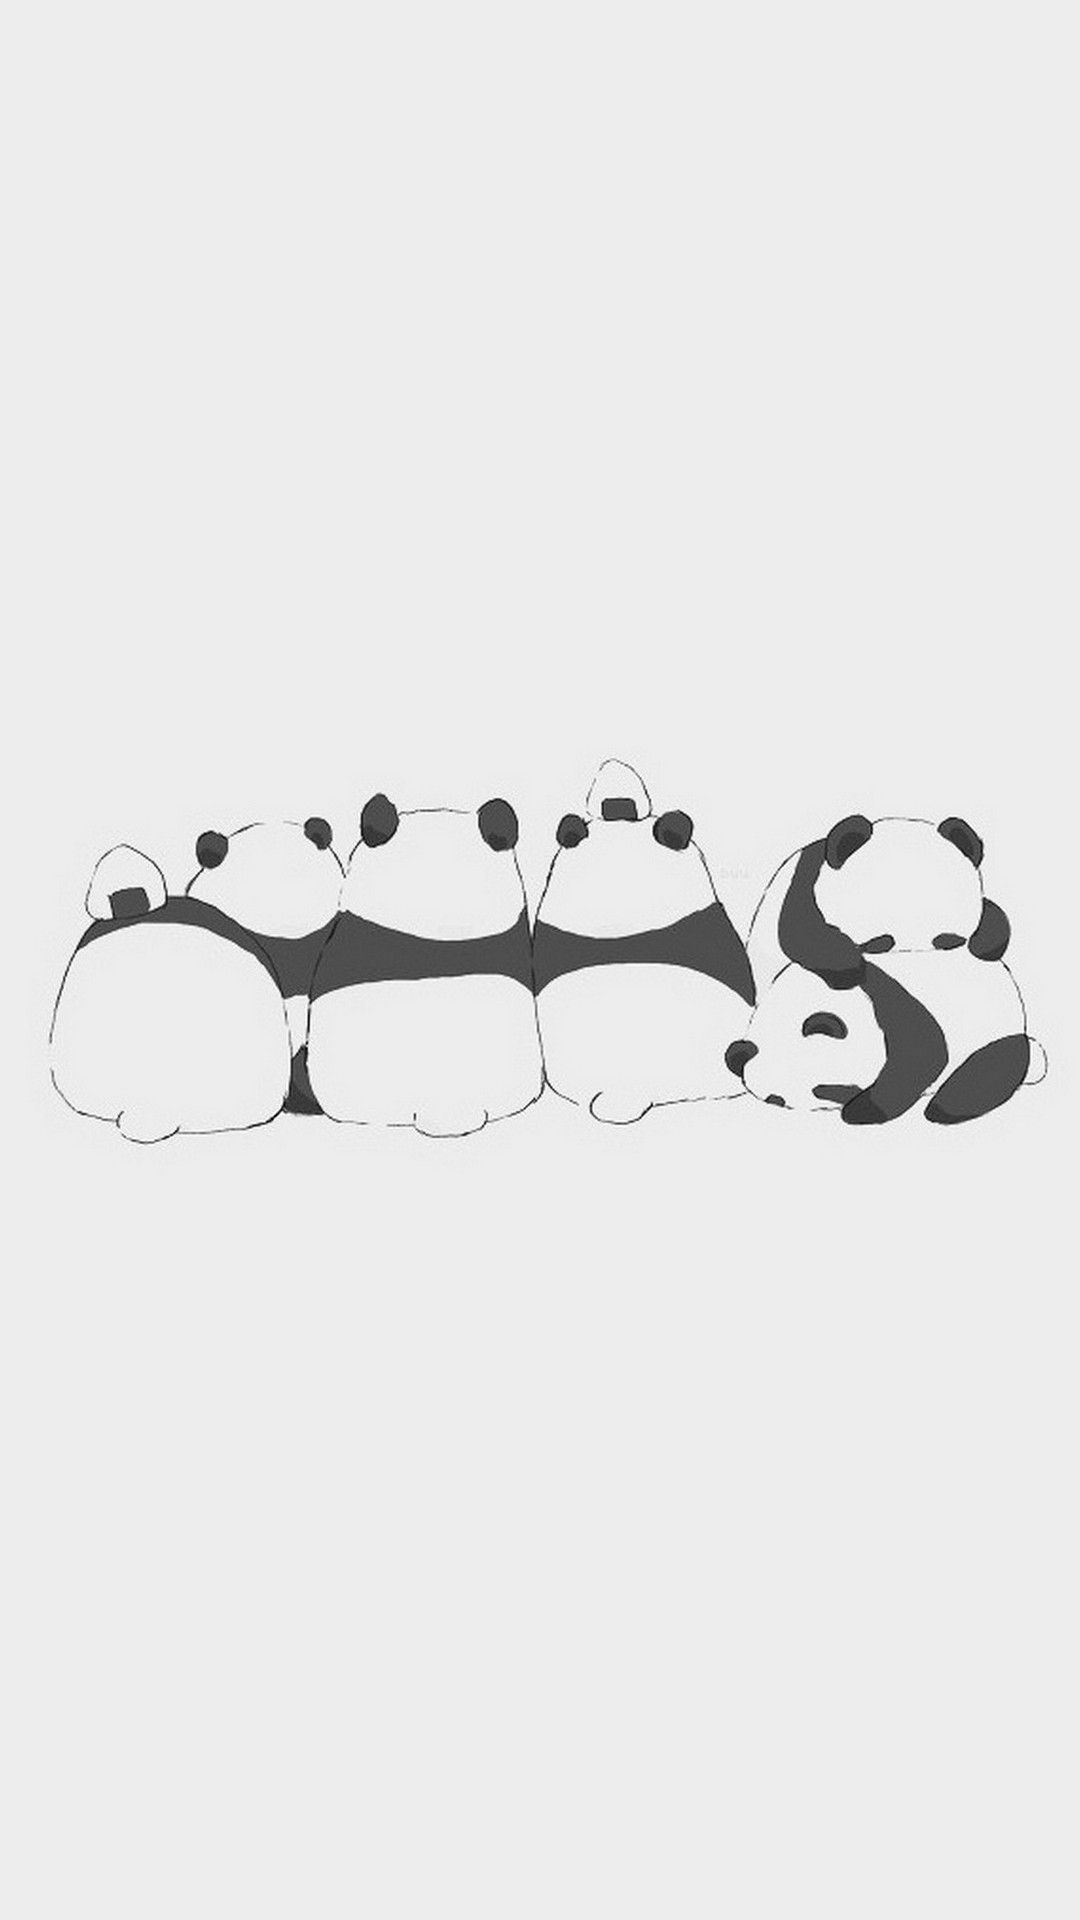 Panda Cute Wallpaper For Android Android Wallpaper. Cute wallpaper for android, Android wallpaper, Cute wallpaper